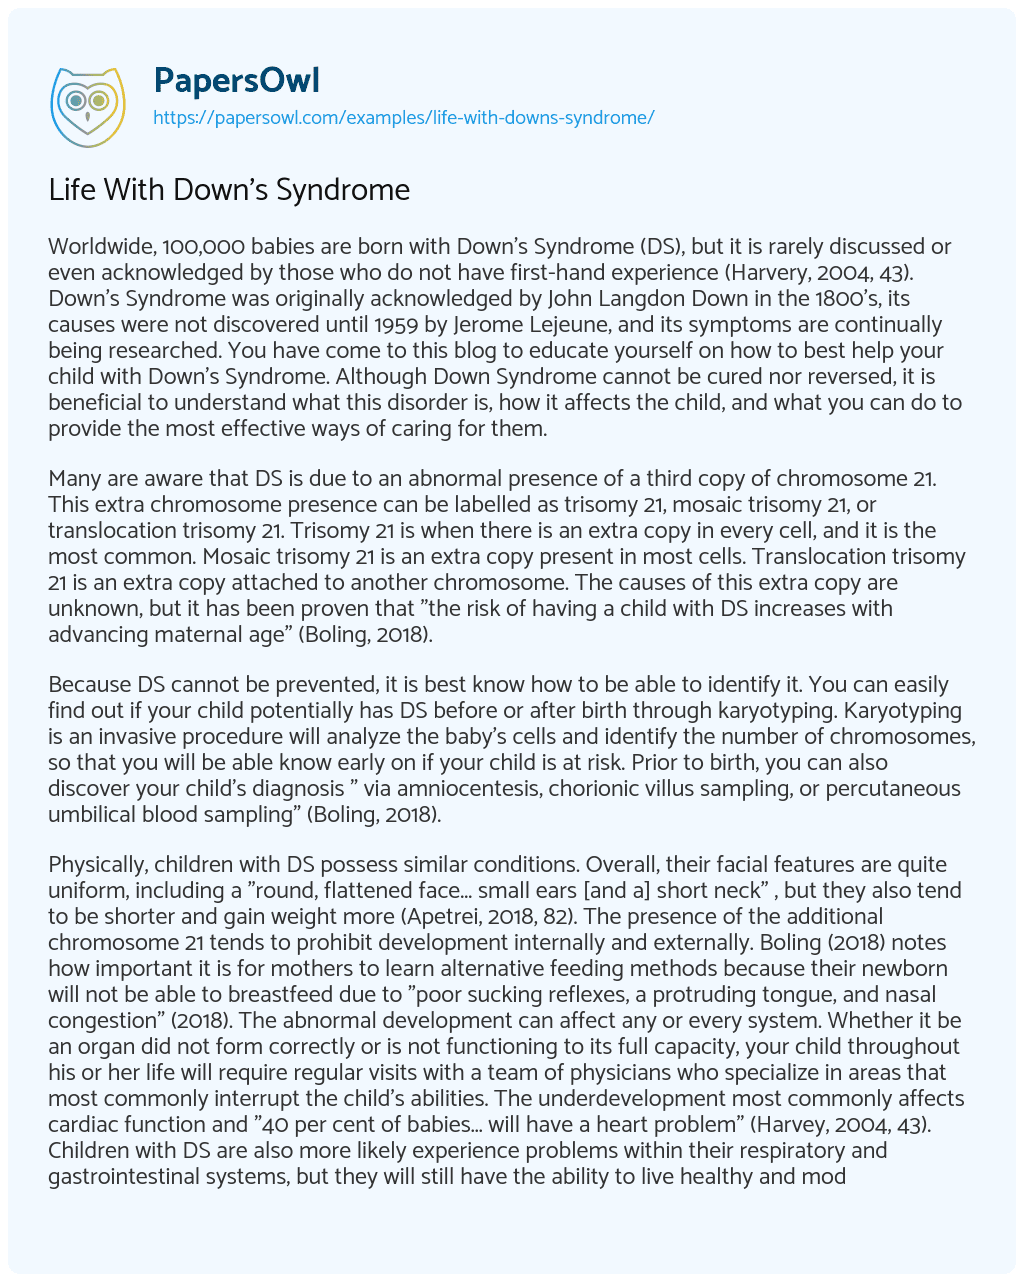 Essay on Life with Down’s Syndrome